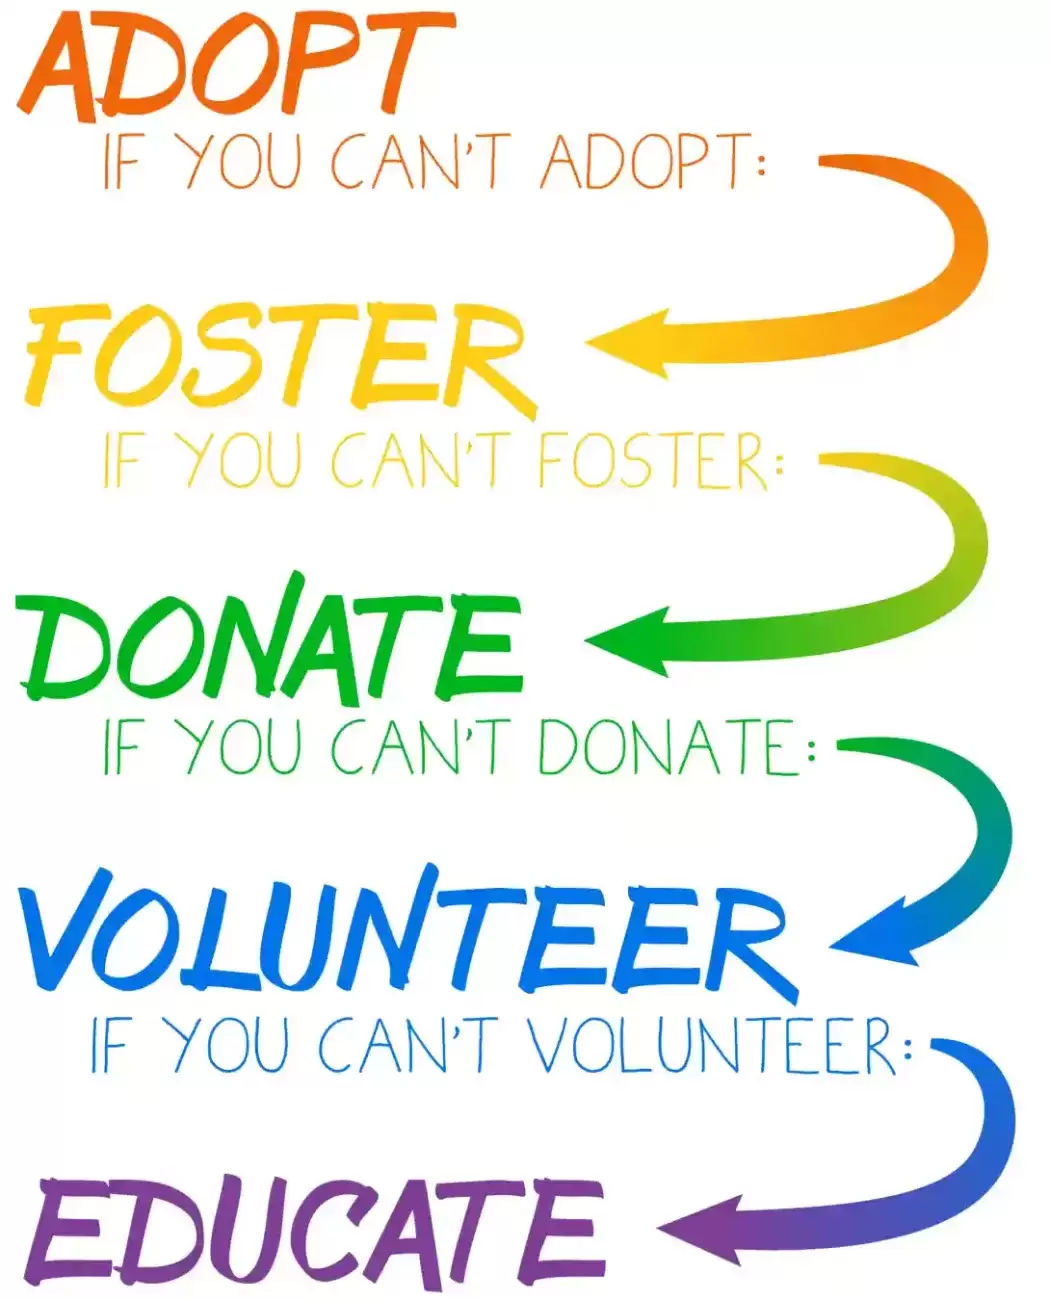 poster with adopt foster donate volunteer and educated as a statement